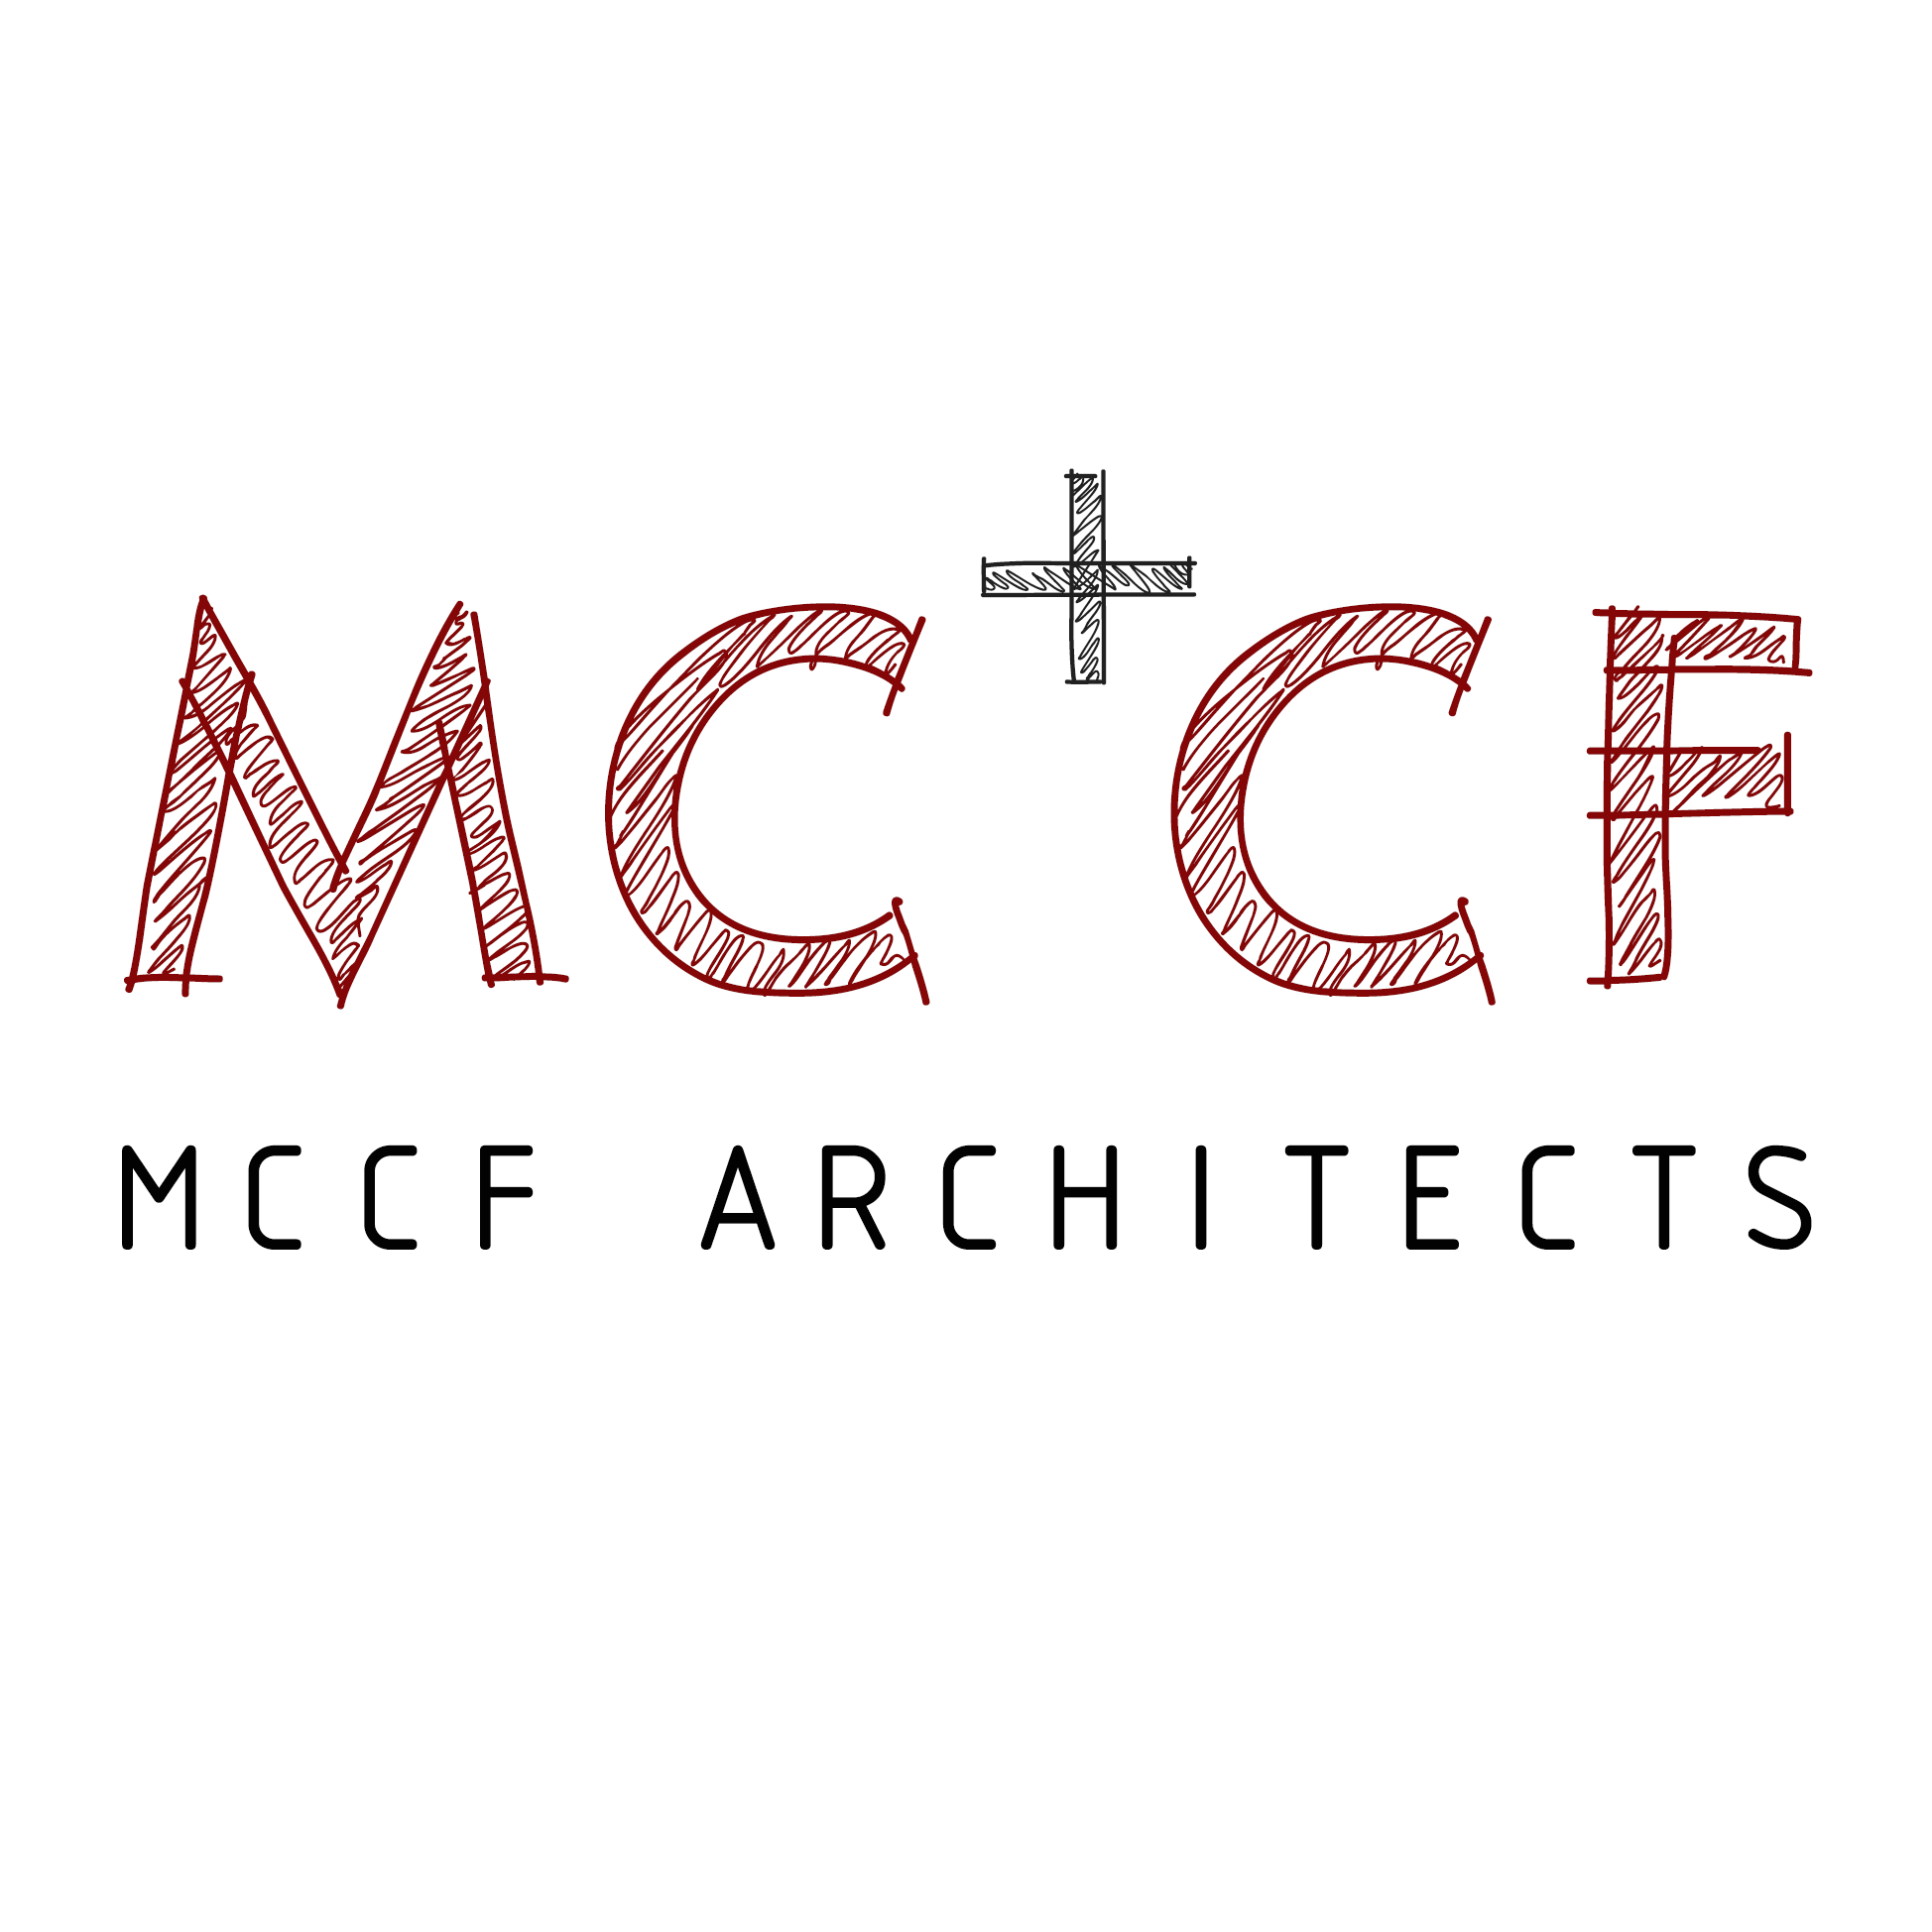 MCCF Architects|Accounting Services|Professional Services